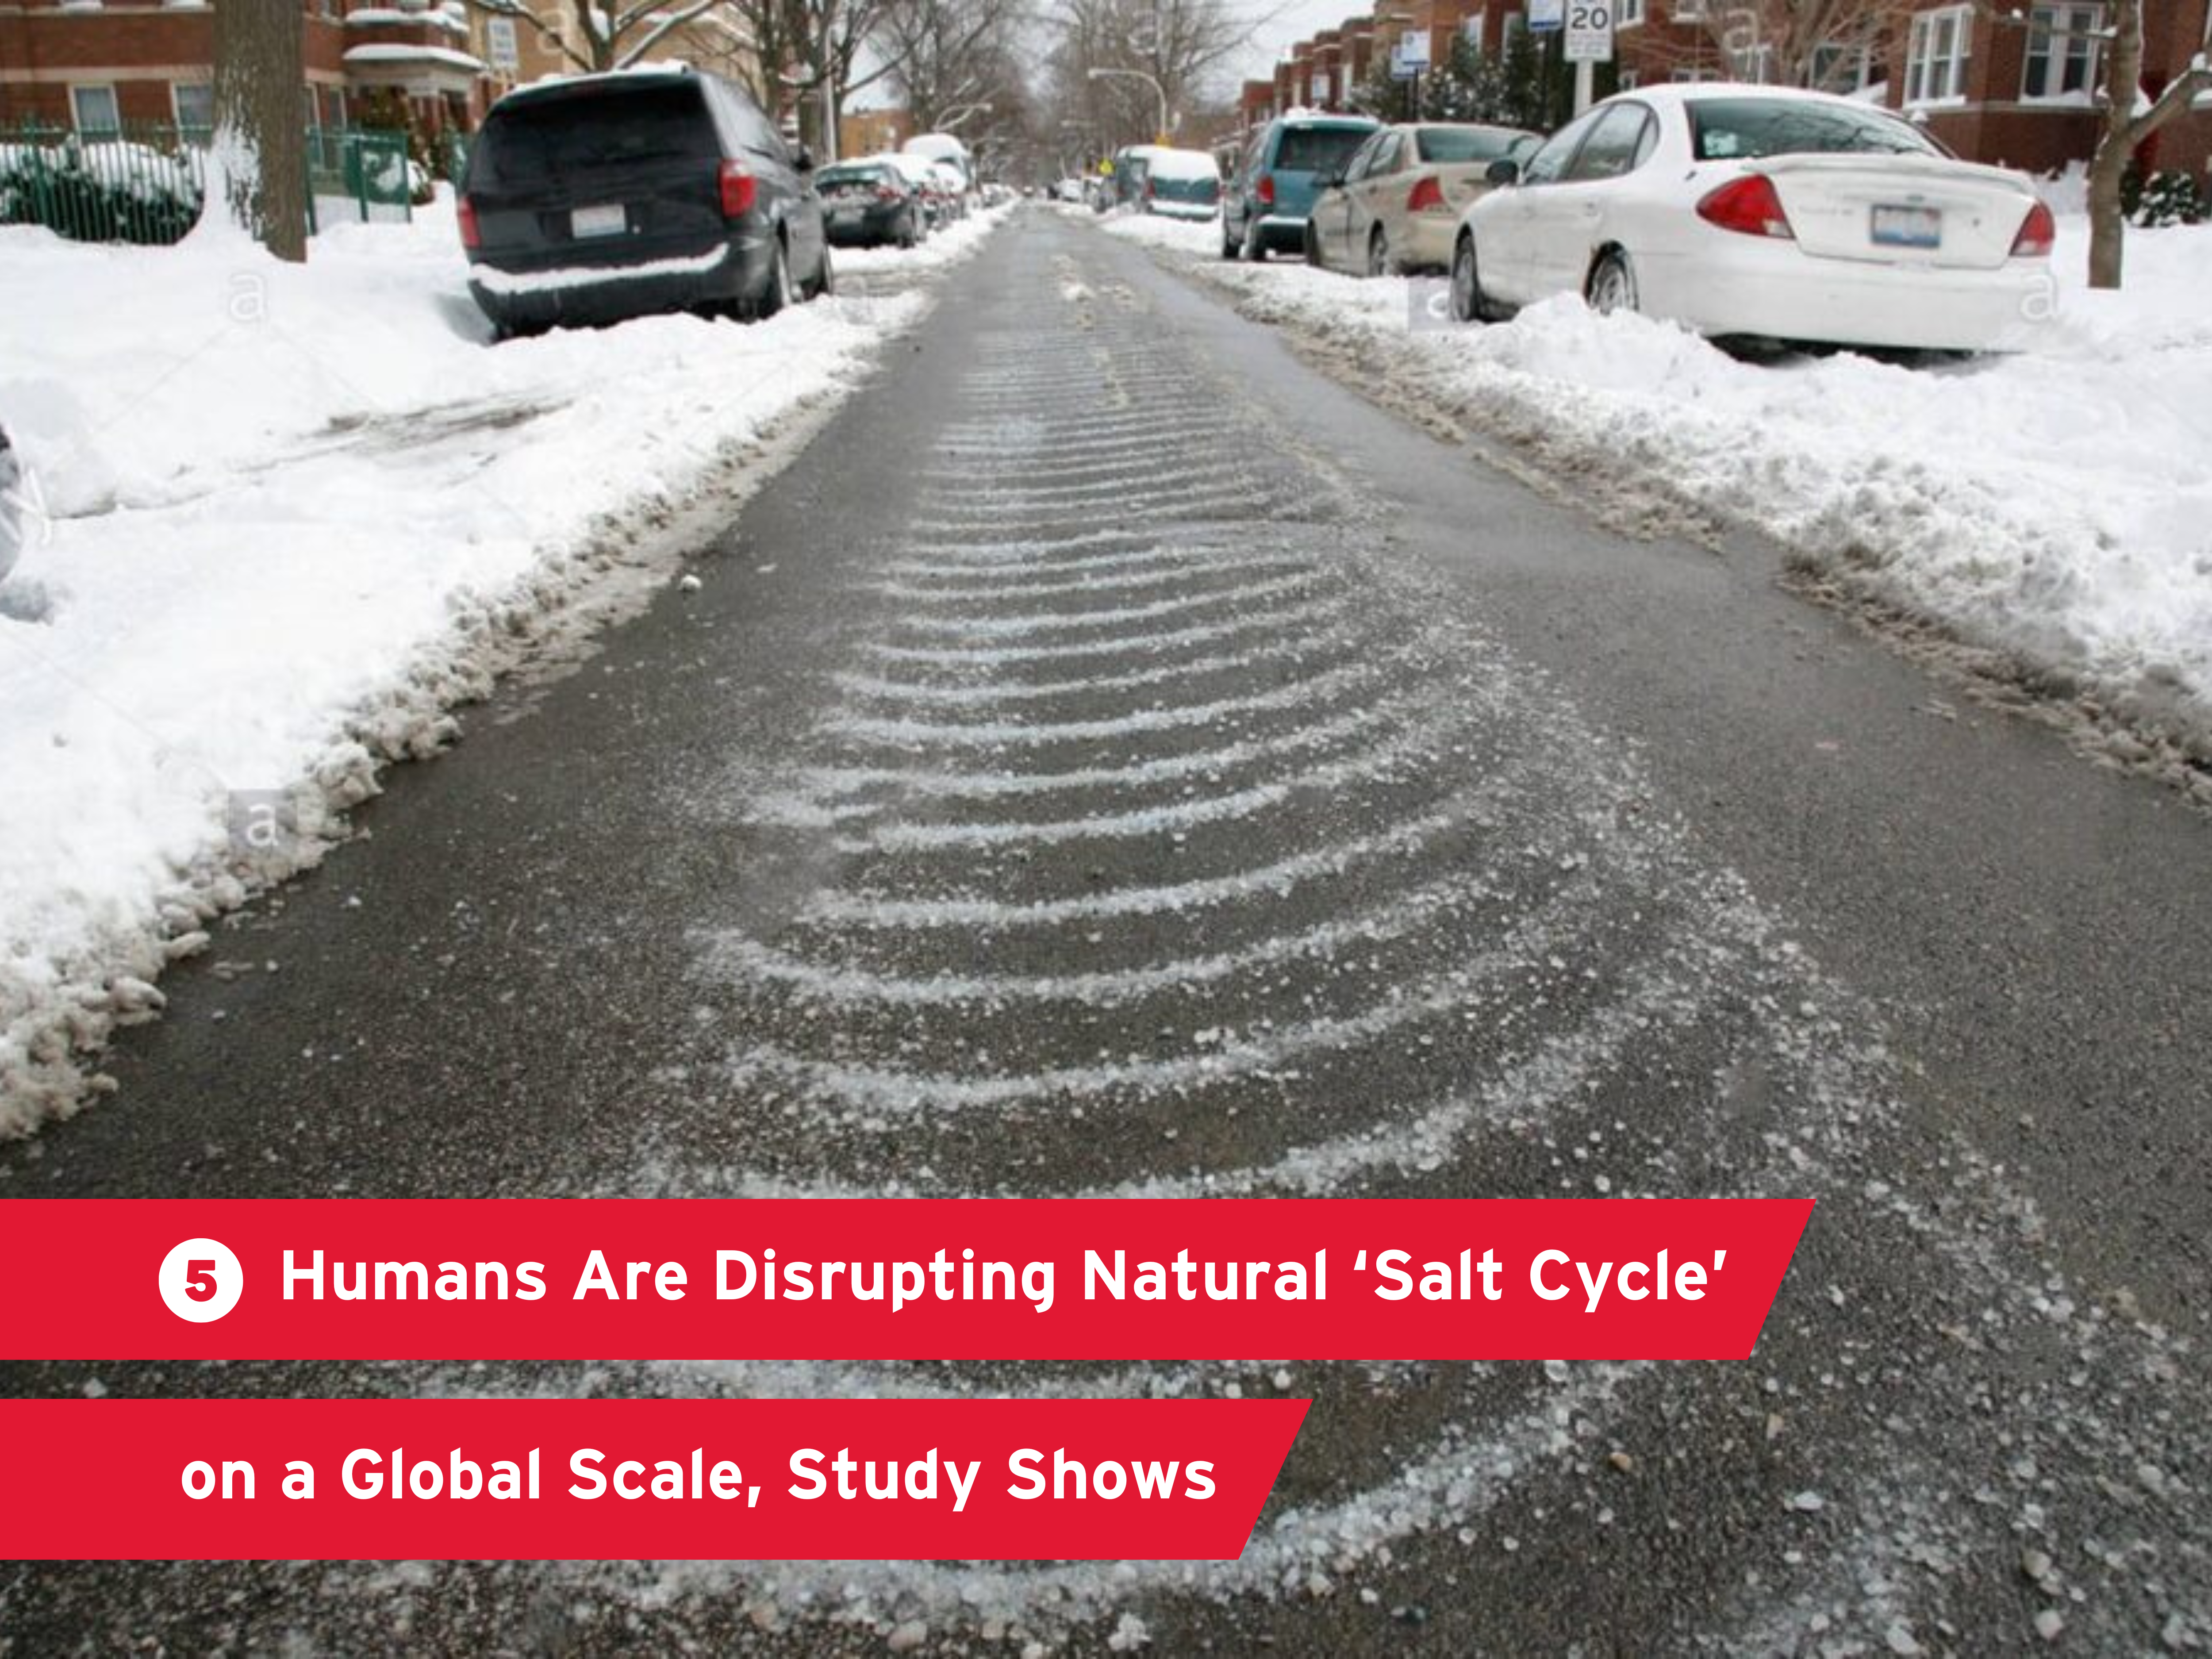 "Humans Are Disrupting Natural ‘Salt Cycle’ on a Global Scale, New Study Shows" over a background of road salt on the street on a snowy day